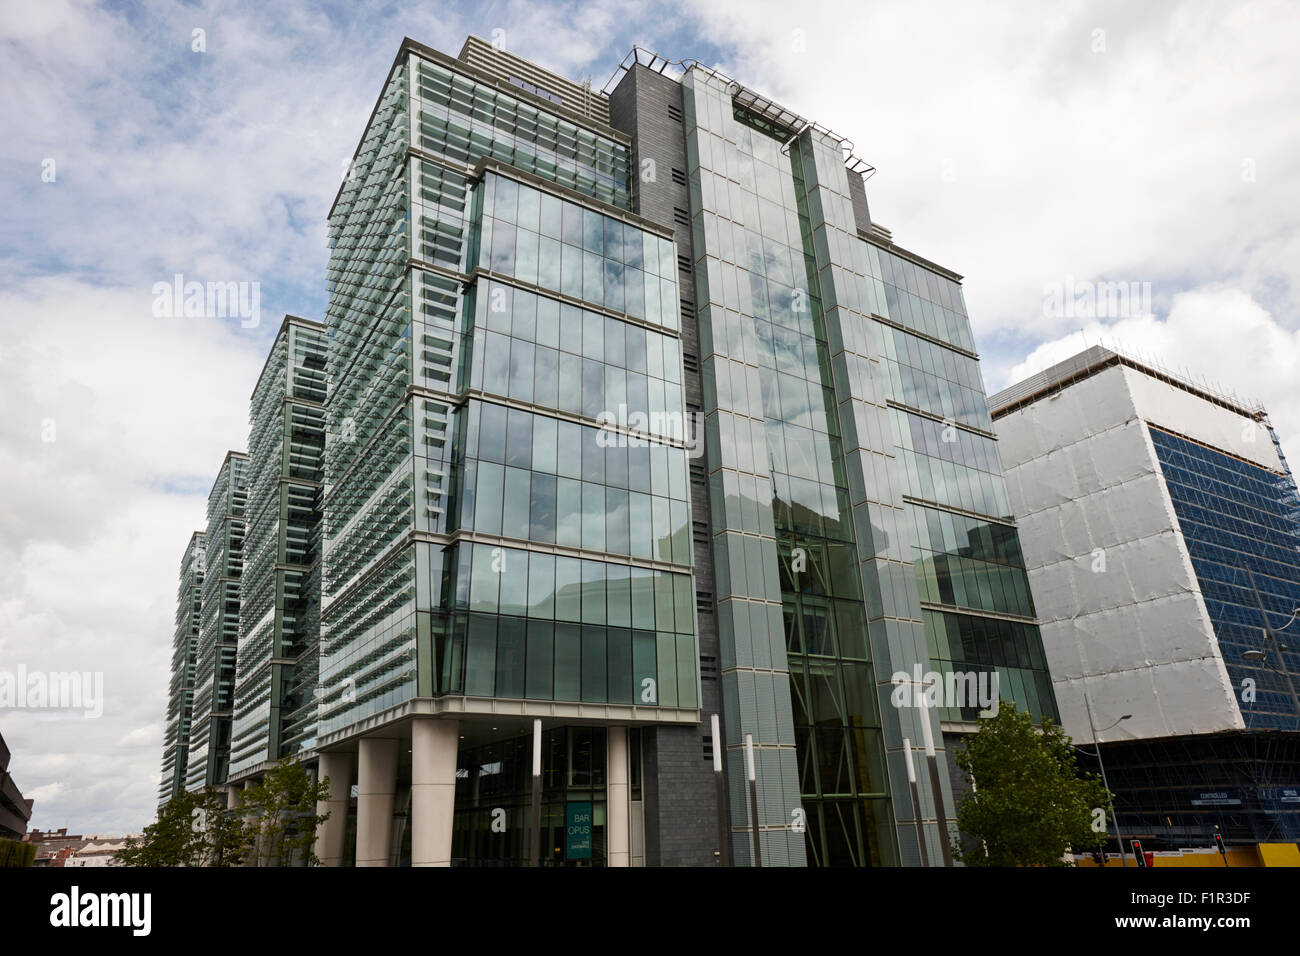 snowhill office development in new financial area of Birmingham UK Stock Photo